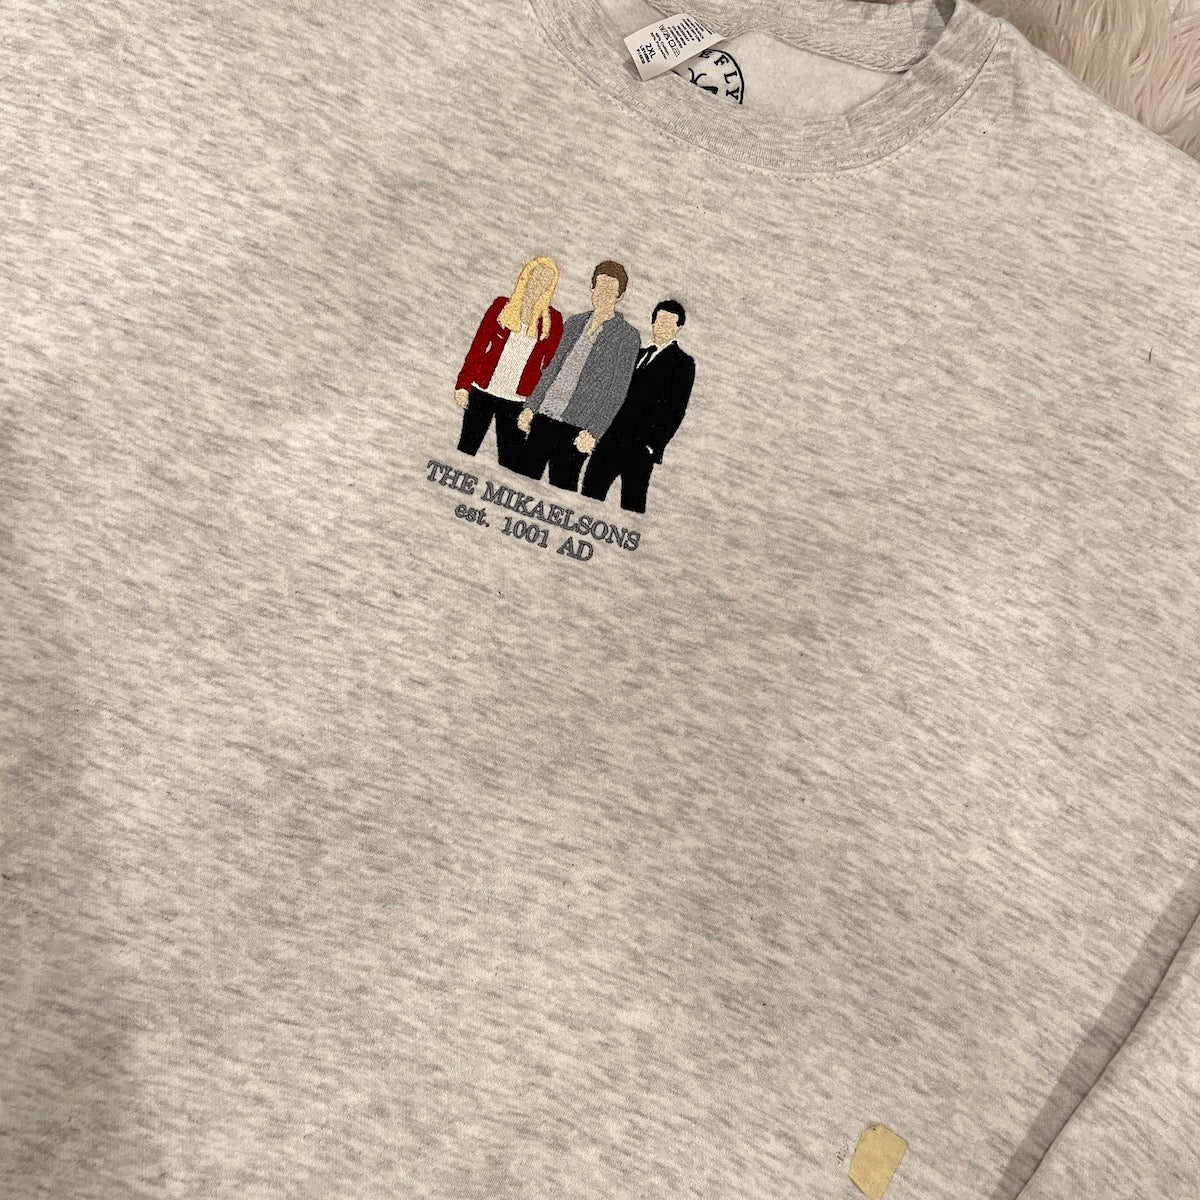 Oopsie Items Mikaelson Crewneck (Size 2Xl) Sweater